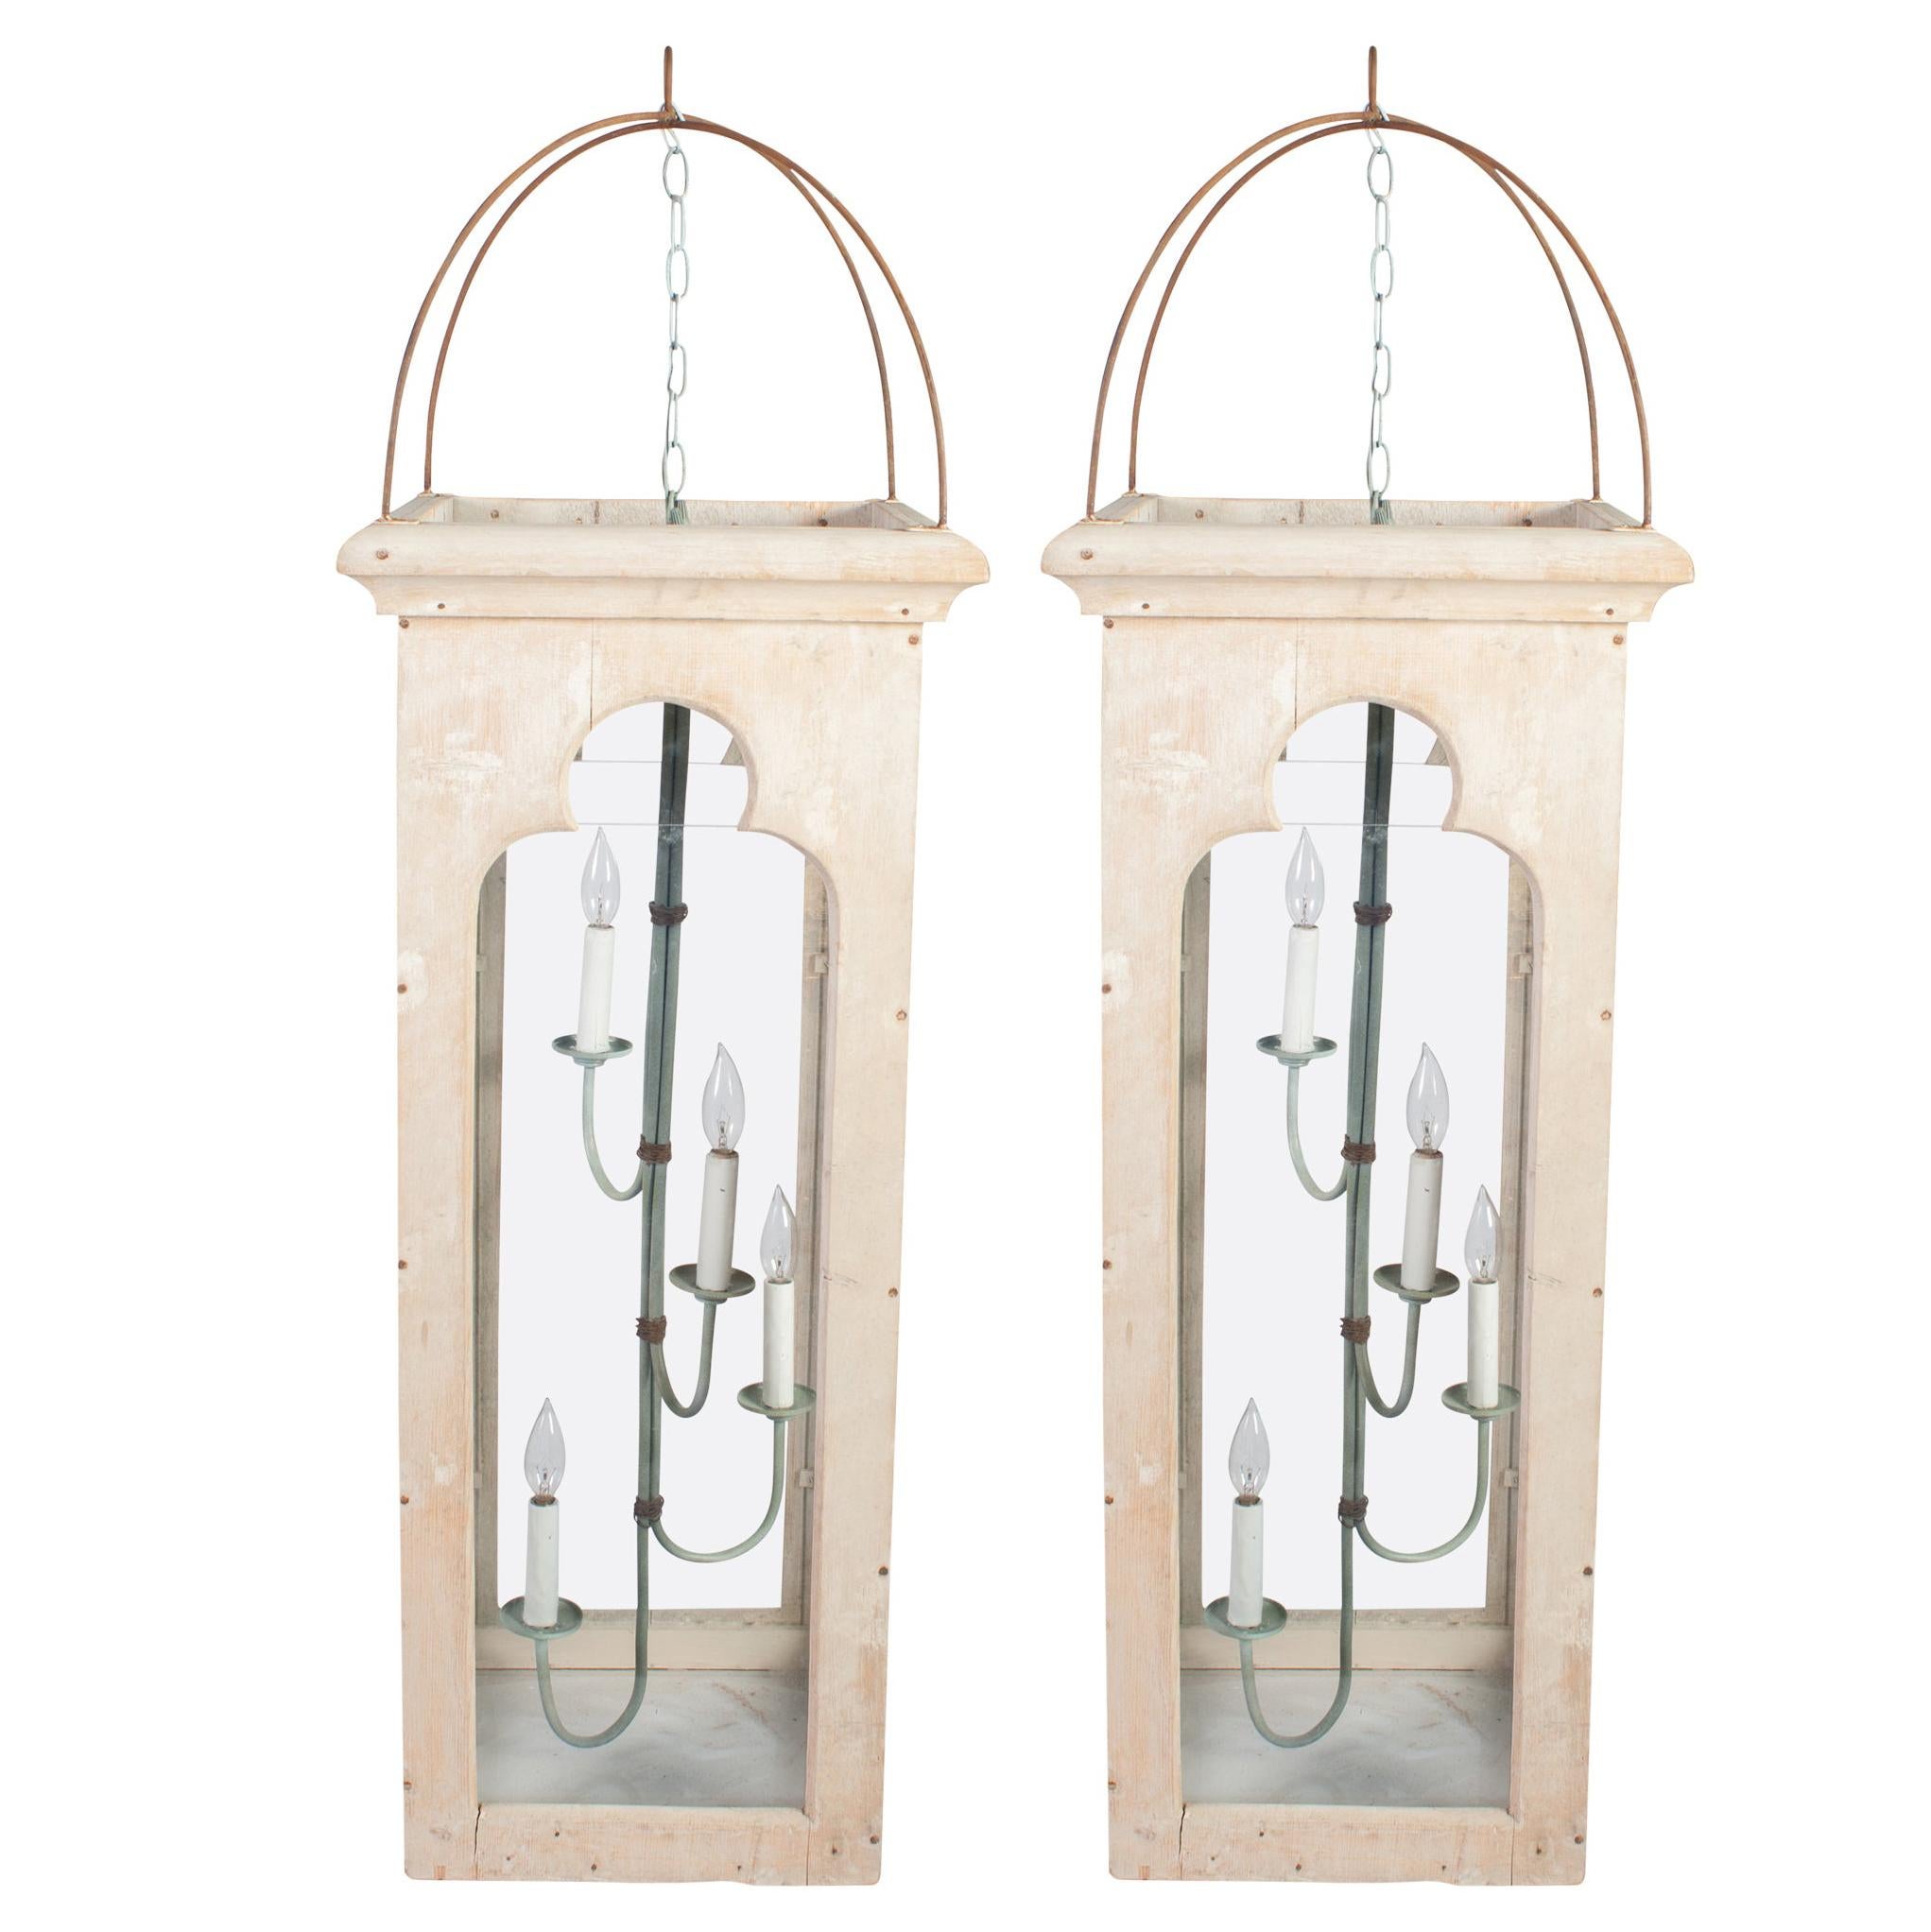 One Pair of Lime Painted Gothic Lanterns